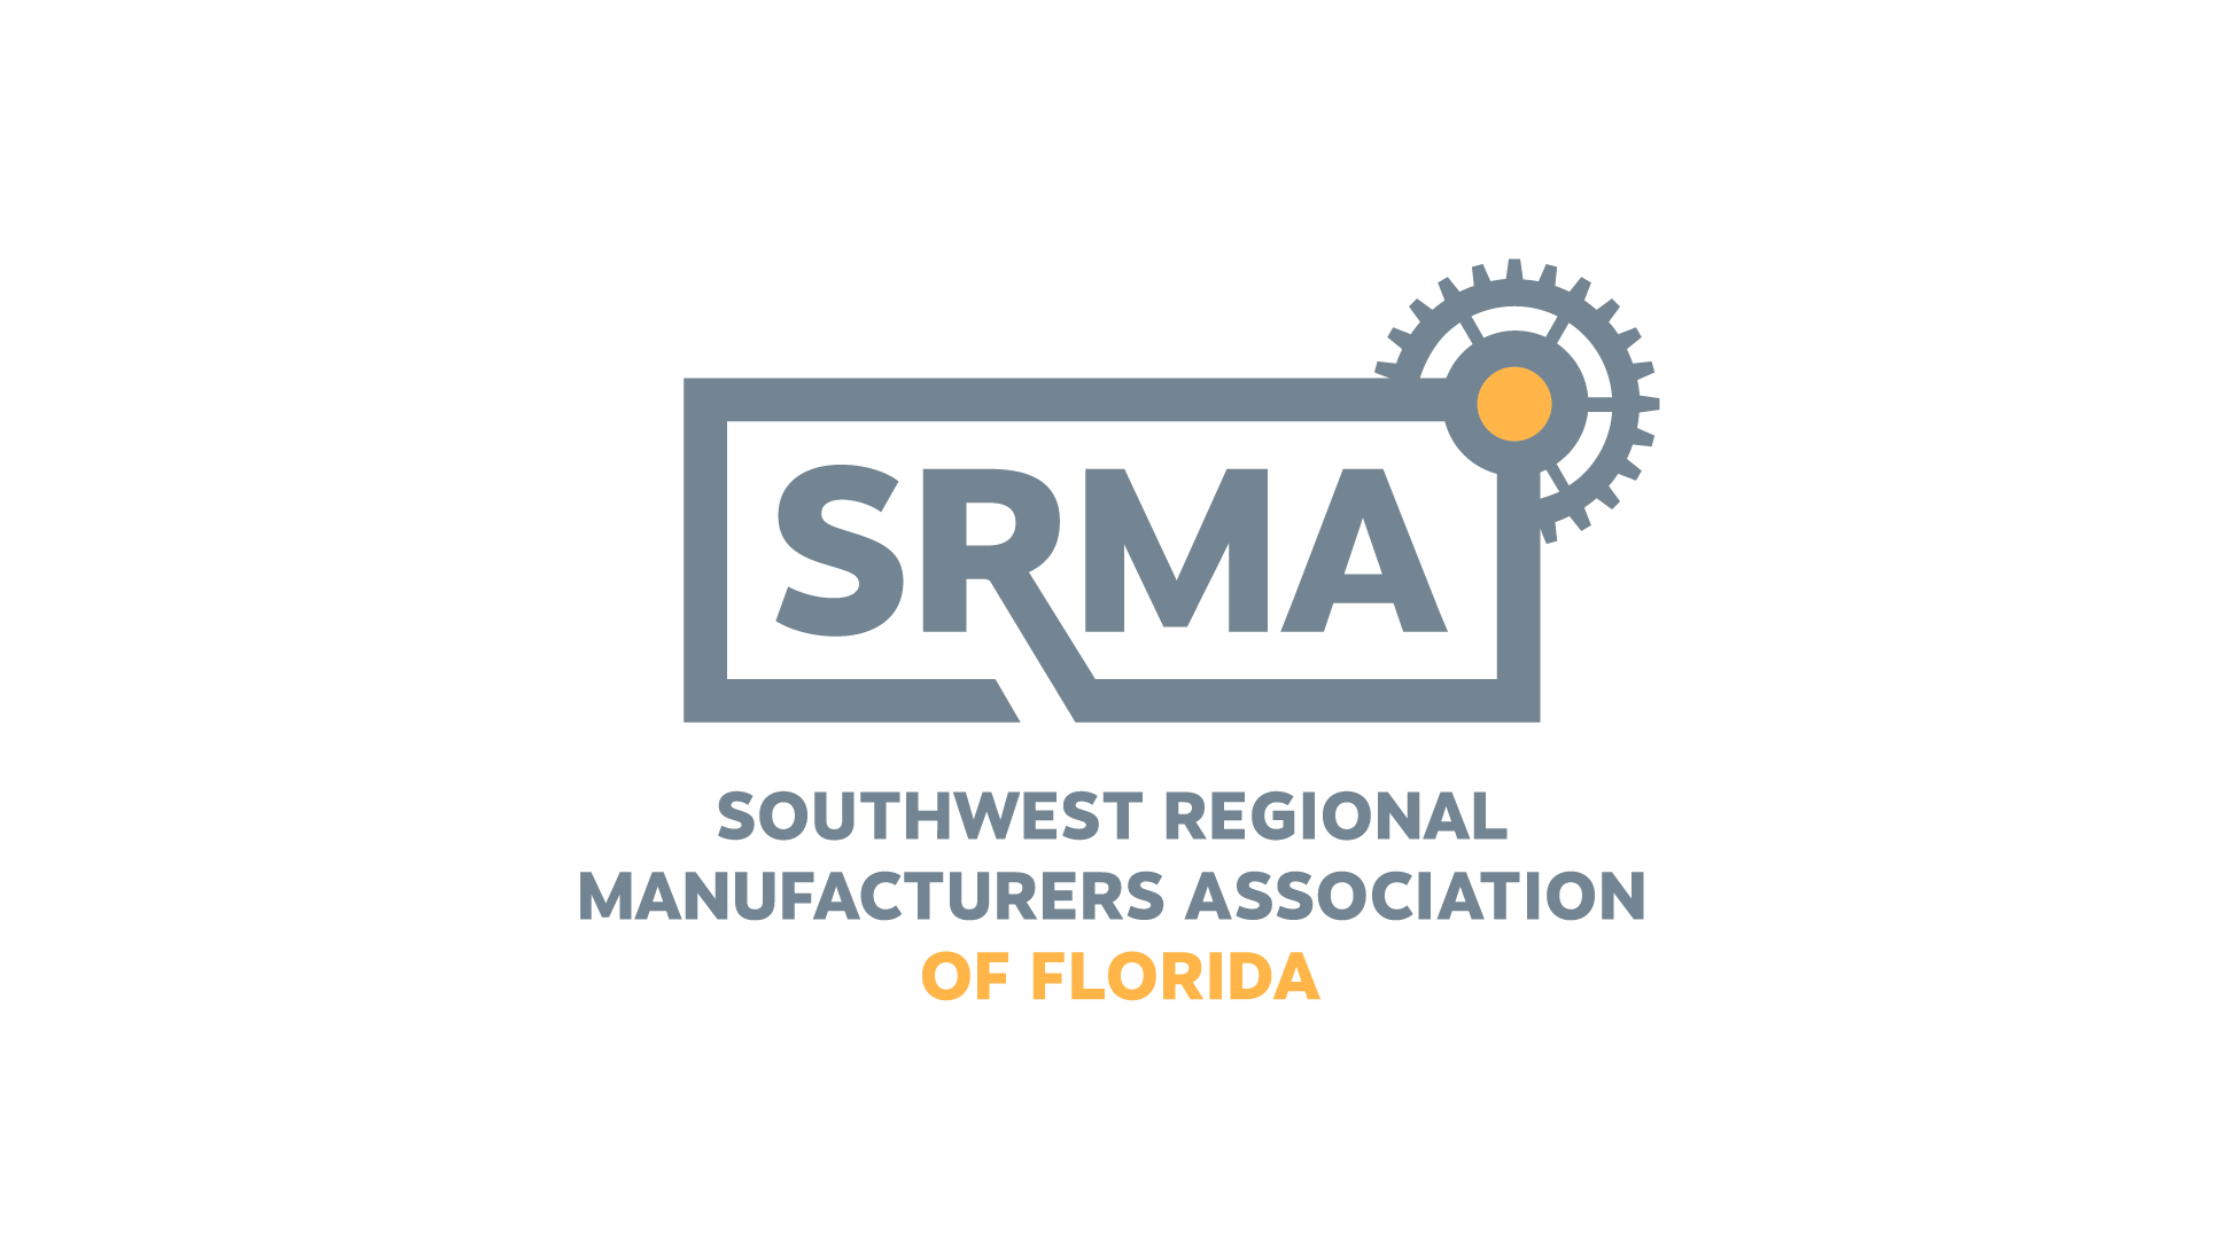 Explore benefits of employee-owned businesses at SRMA event